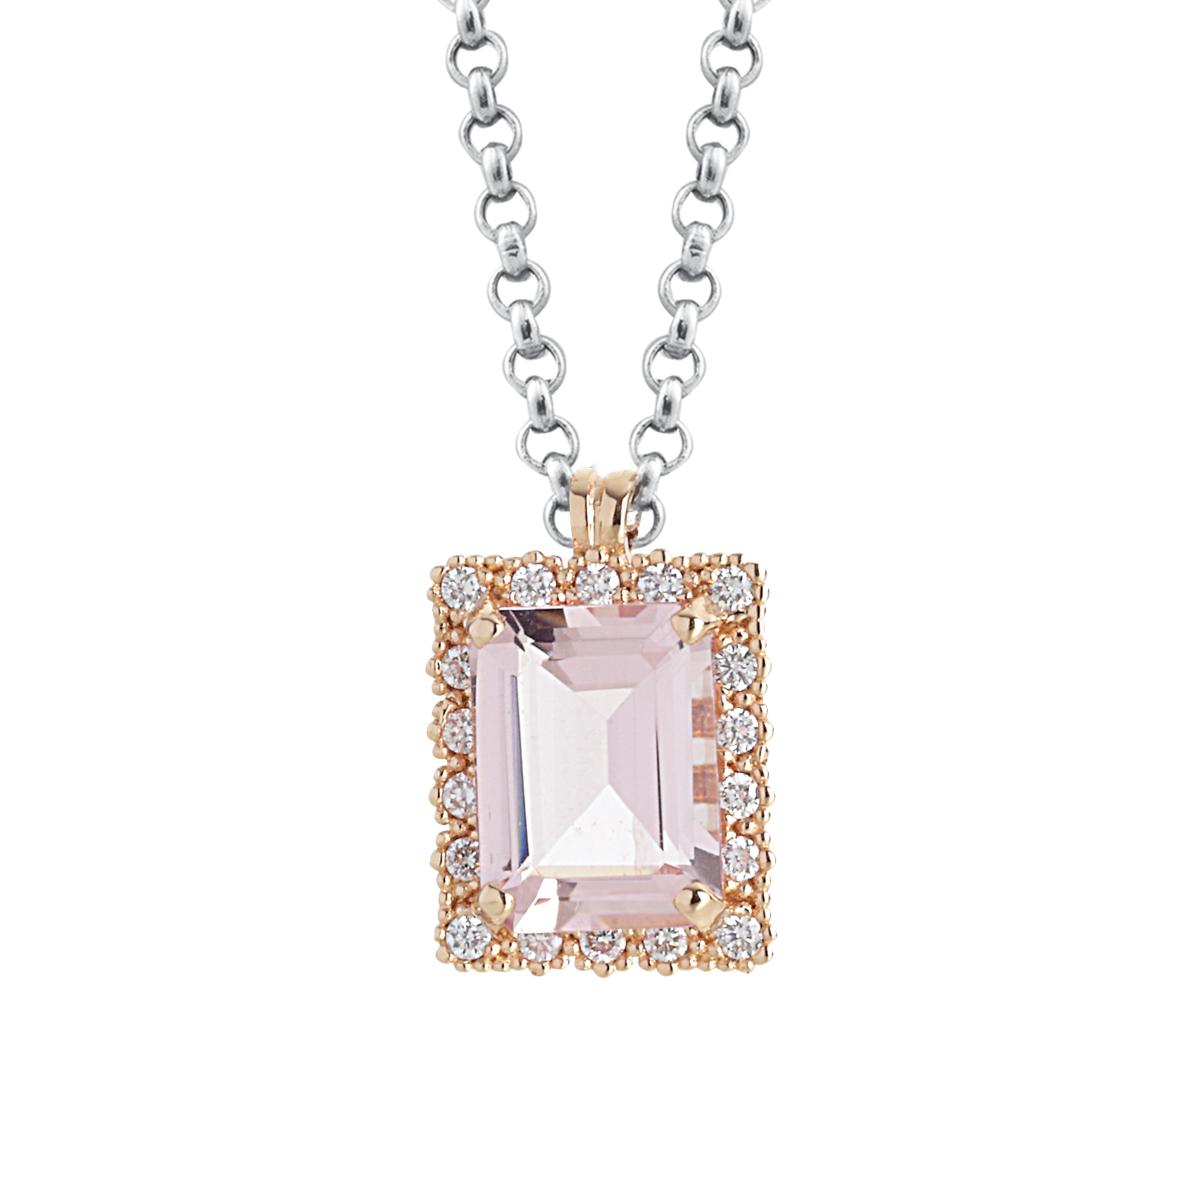 Gold necklace with Morganite and Diamonds - CD287/MO-LH